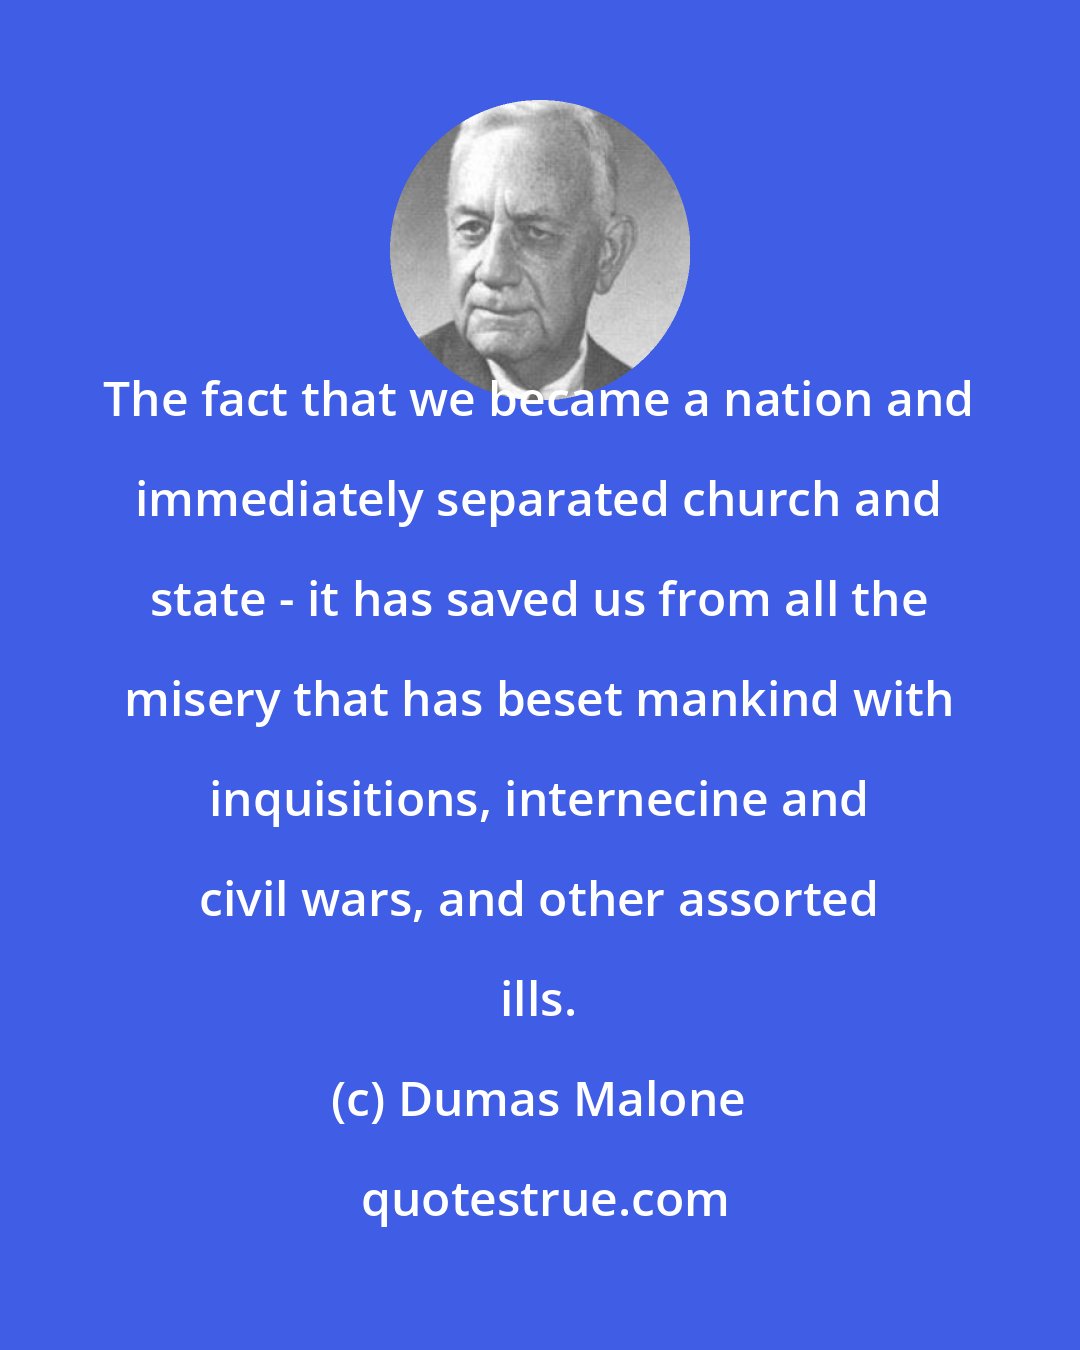 Dumas Malone: The fact that we became a nation and immediately separated church and state - it has saved us from all the misery that has beset mankind with inquisitions, internecine and civil wars, and other assorted ills.